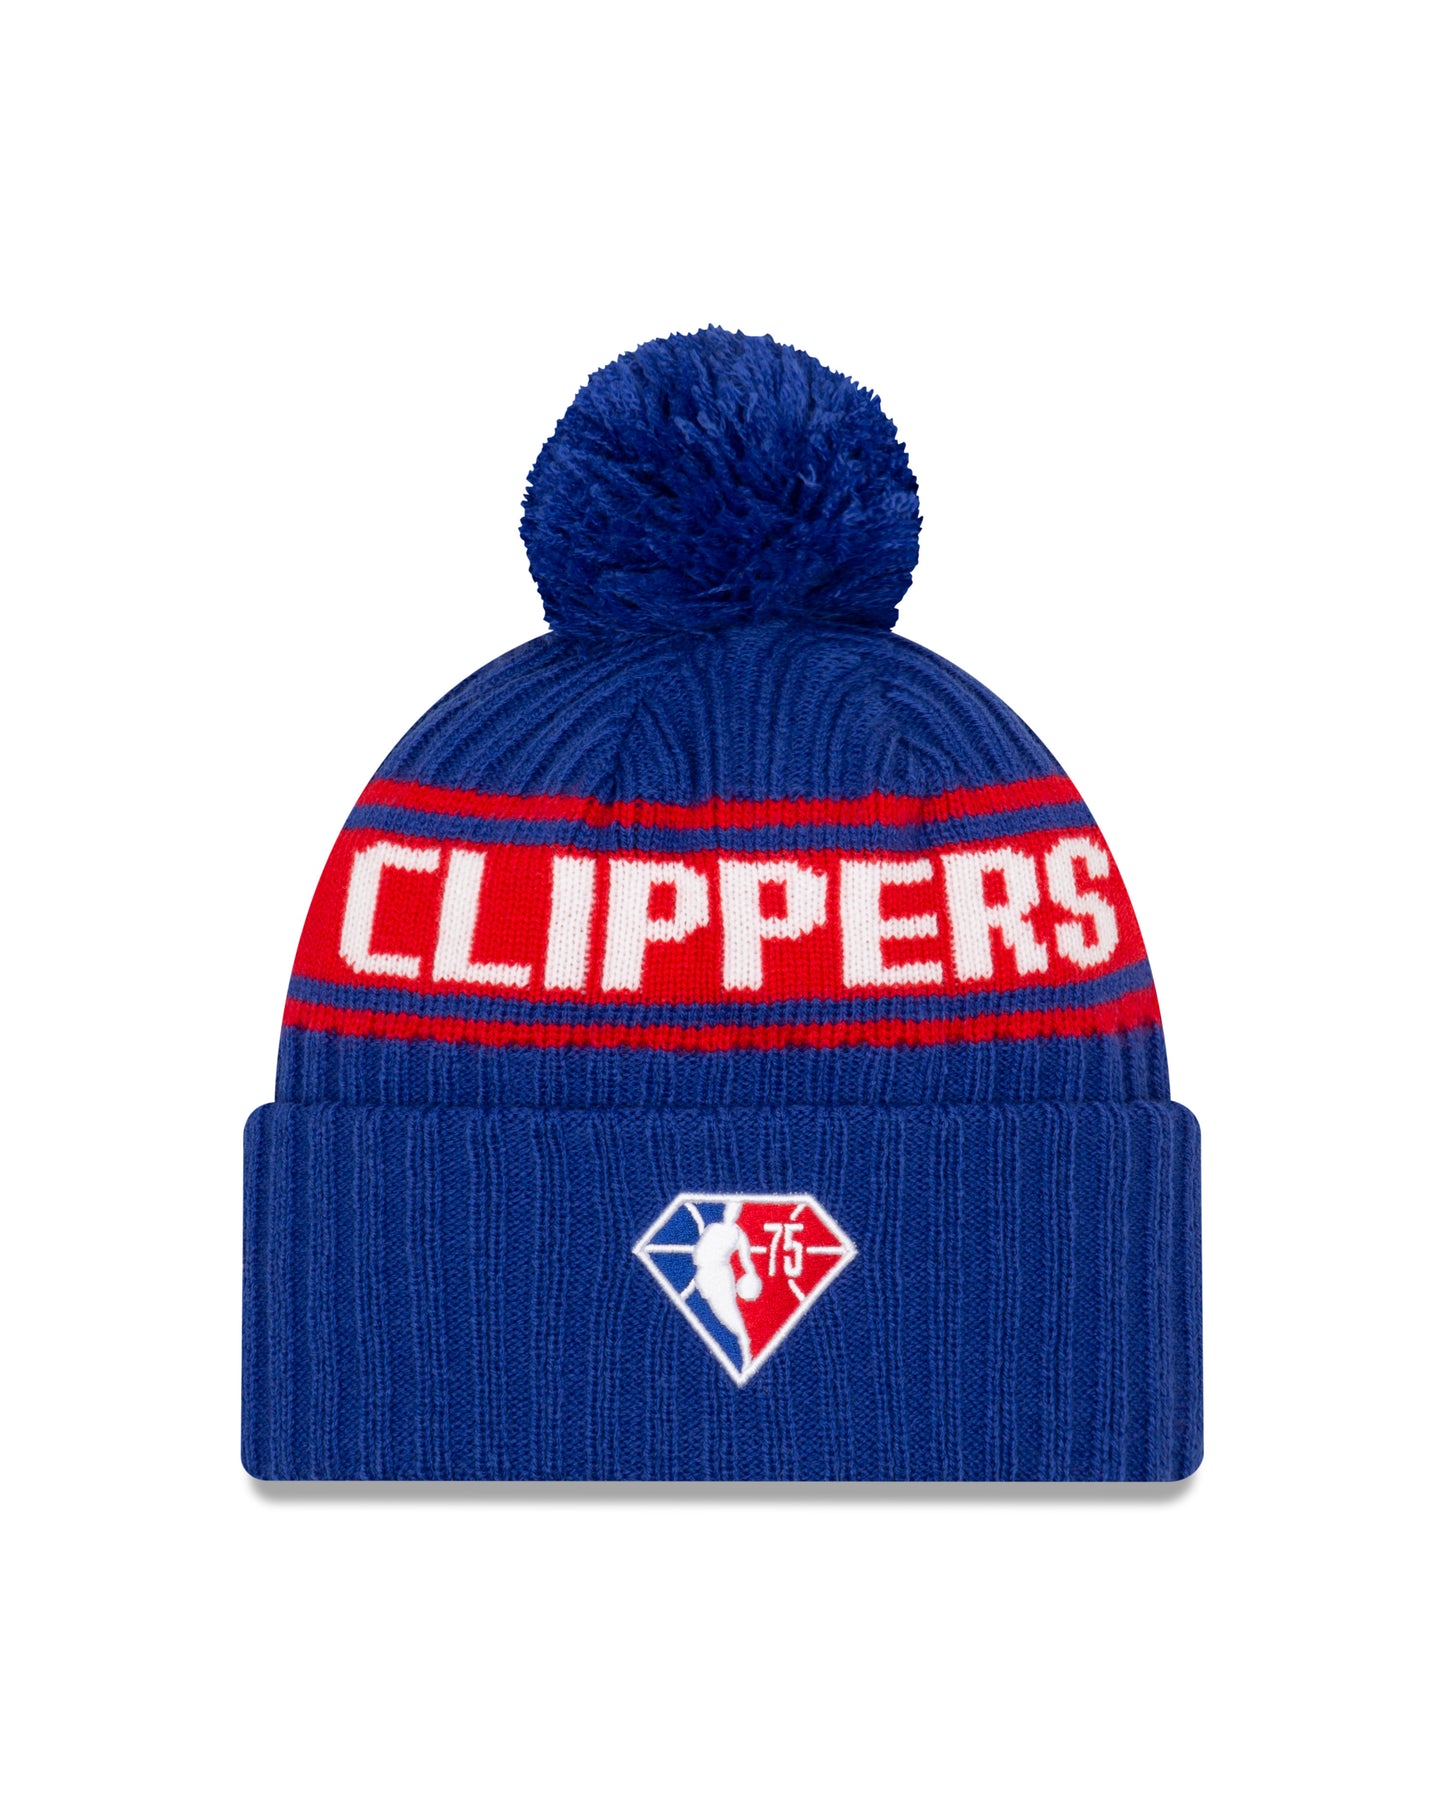 Los Angeles Clippers New Era Draft Knit Hat